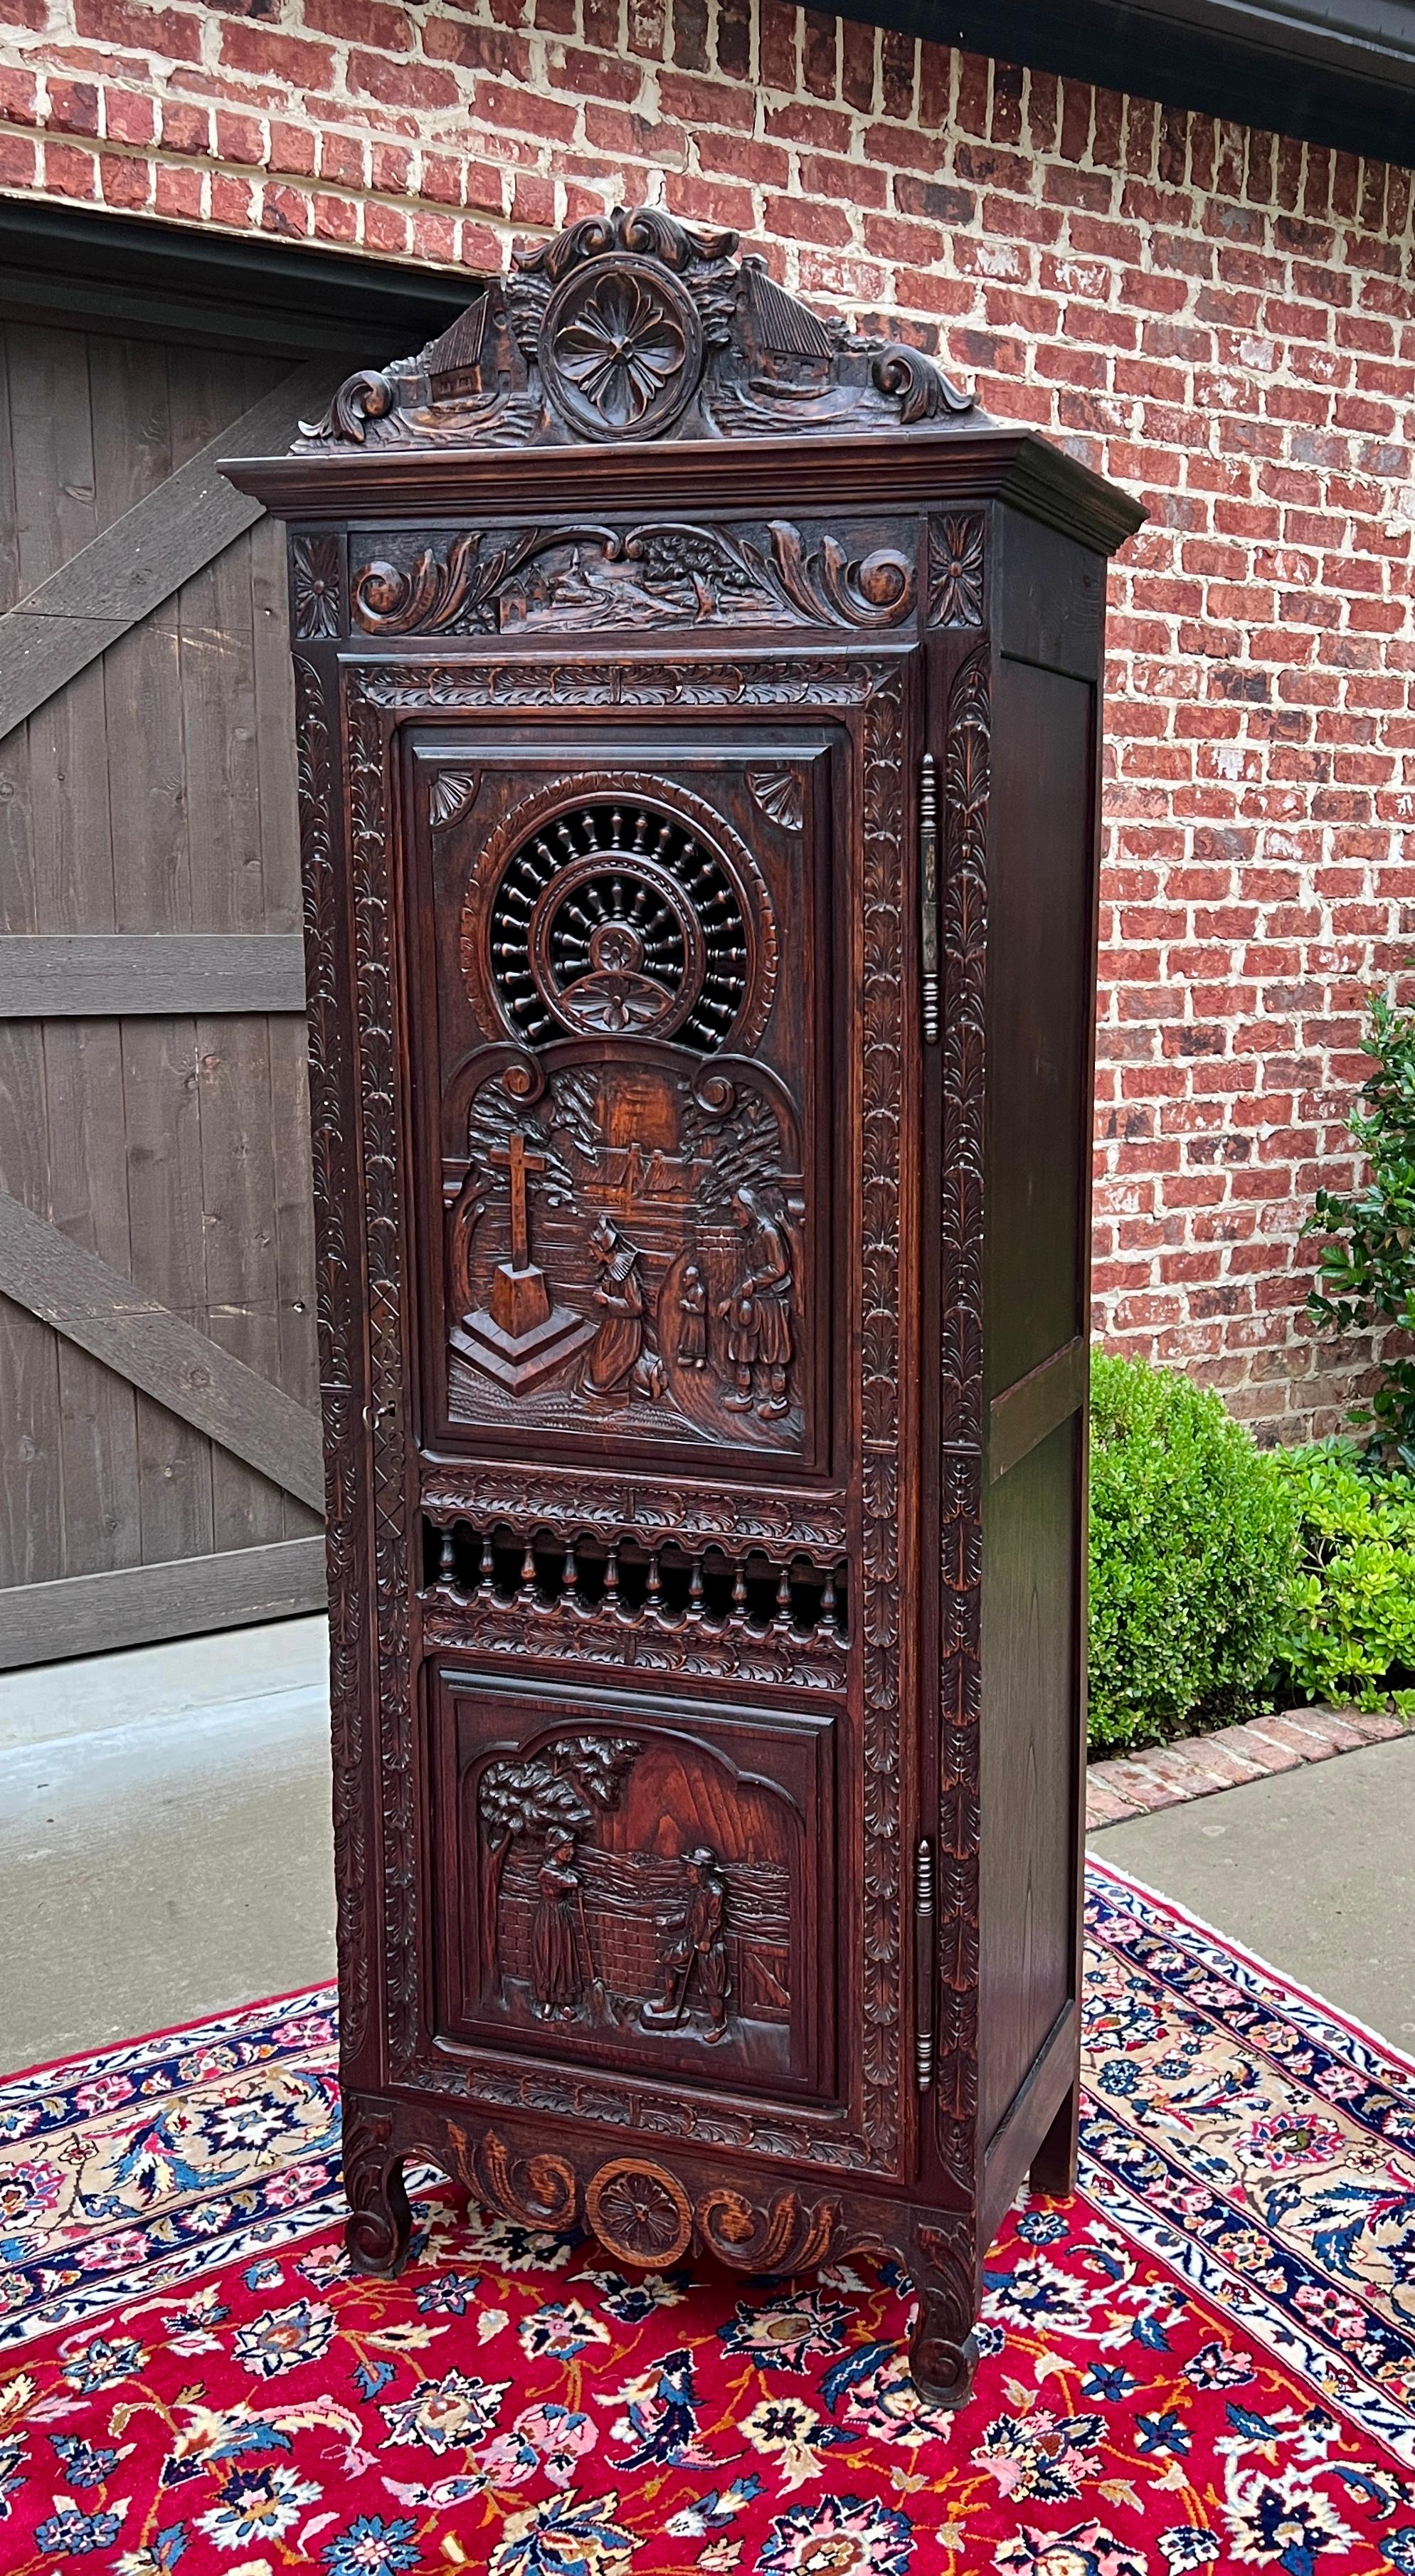 CHARMING Antique French Breton Chestnut Armoire, Wardrobe, Cabinet, Linen Closet with Interior Shelves c. 1890s


        BEAUTIFUL STATEMENT PIECE~~French chestnut armoire, wardrobe or cabinet with carved crown and original key~~excellent storage